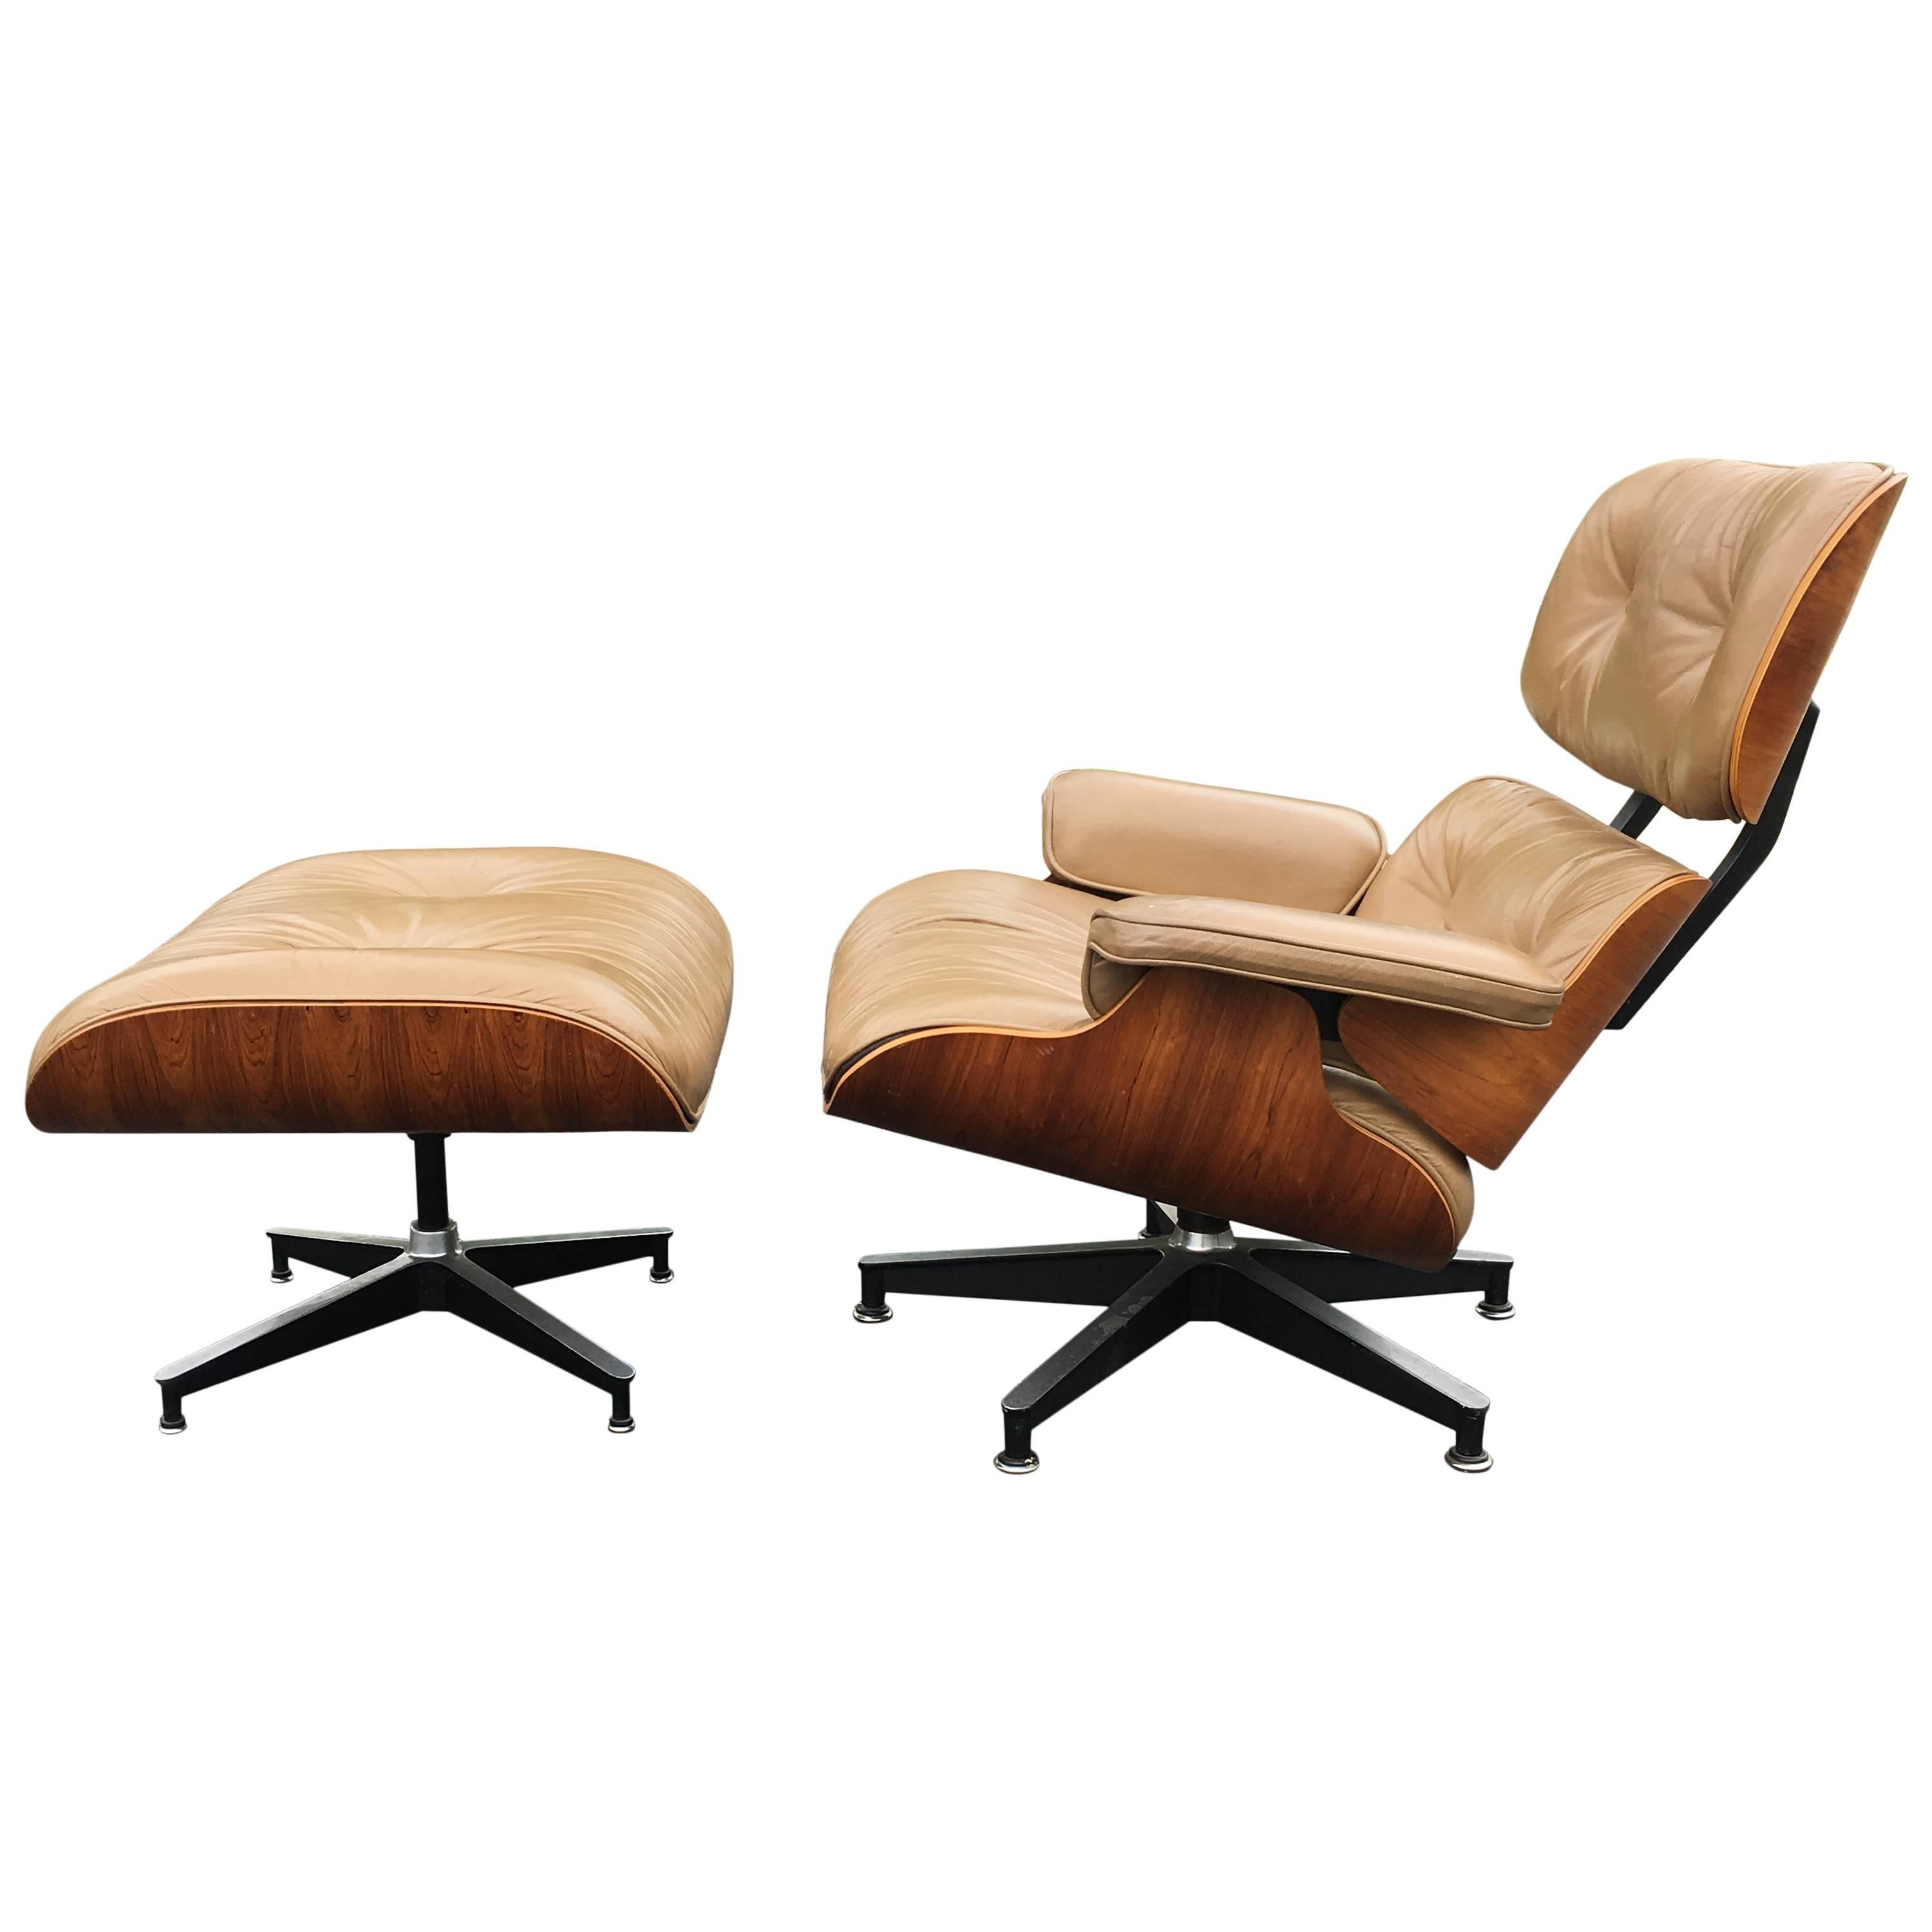 Rosewood and Tan Herman Miller Eames Lounge Chair and Ottoman